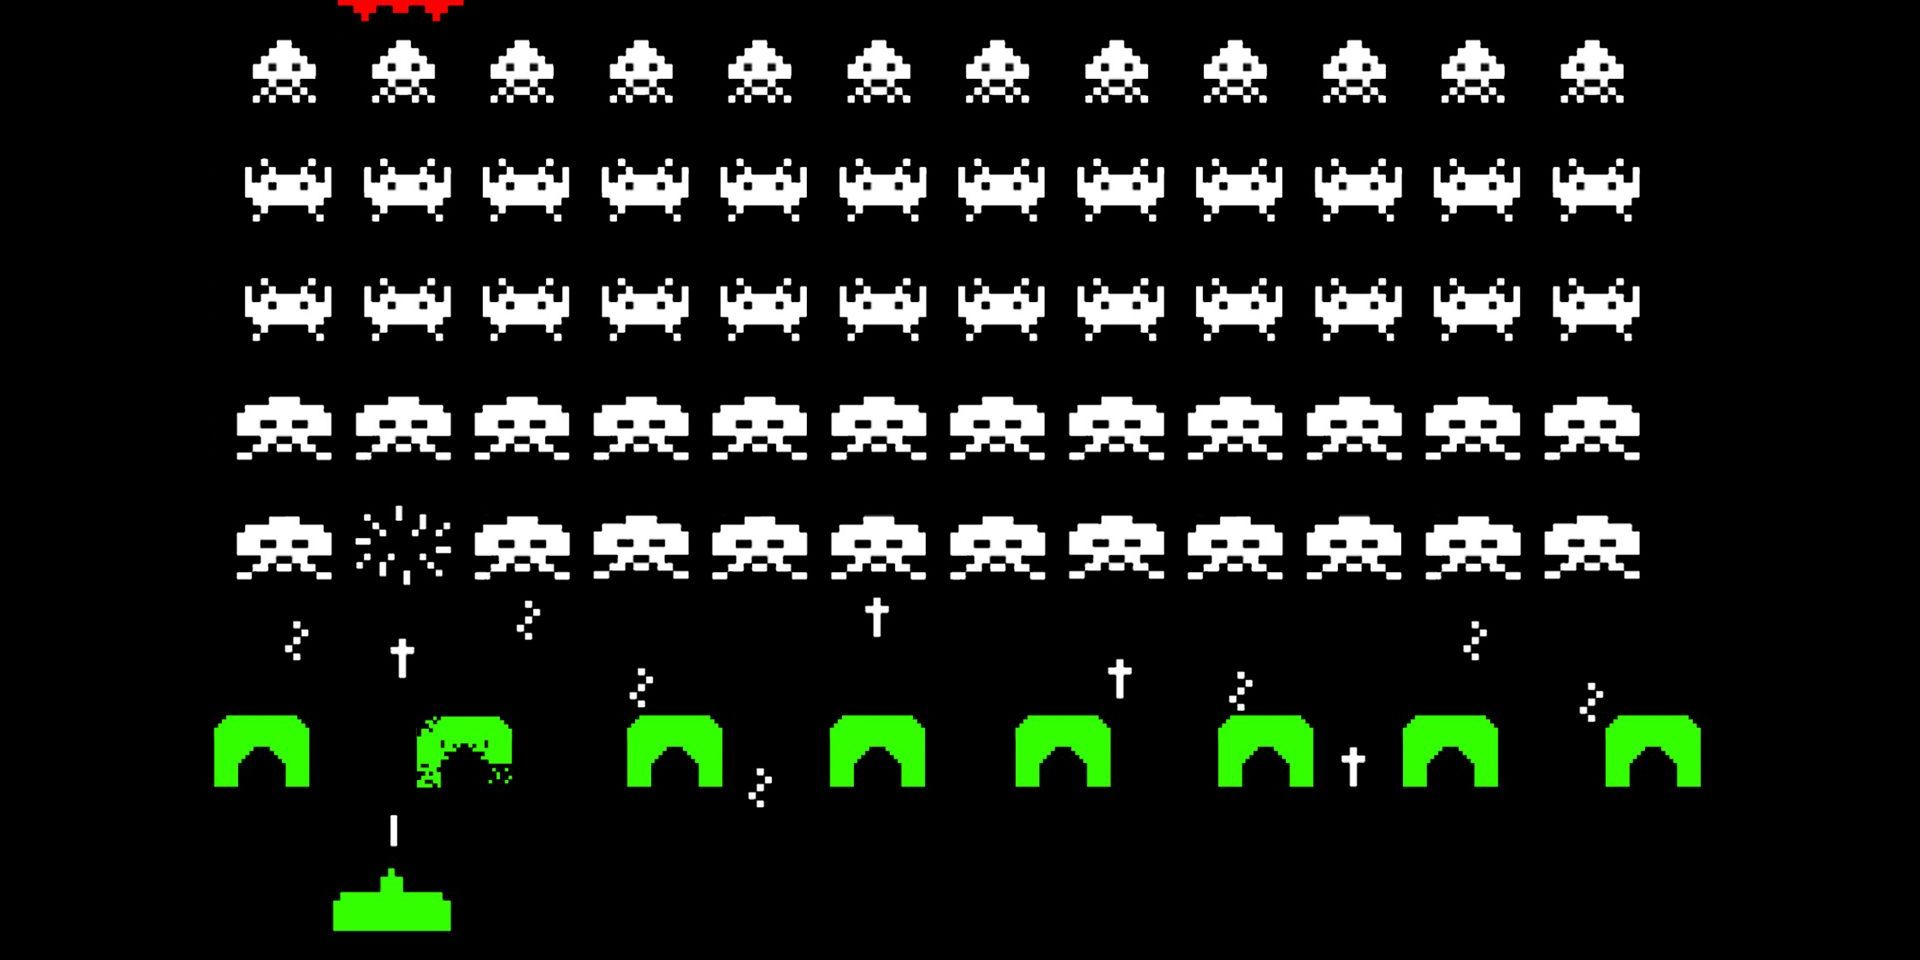 Gameplay screenshot from the original arcade classic Space Invaders